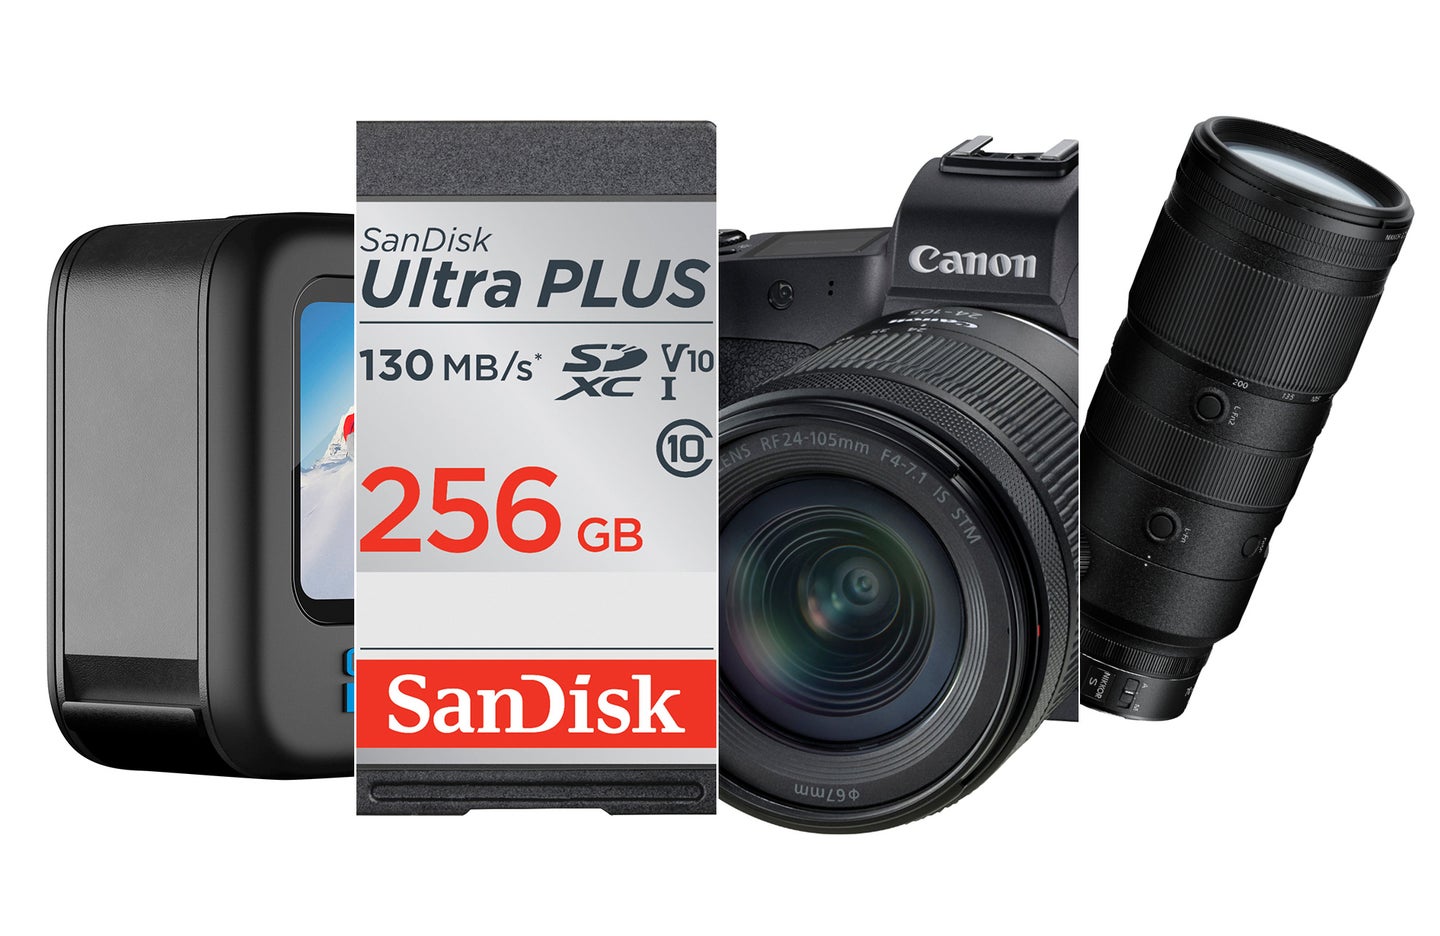 The best Memorial Day sales on cameras